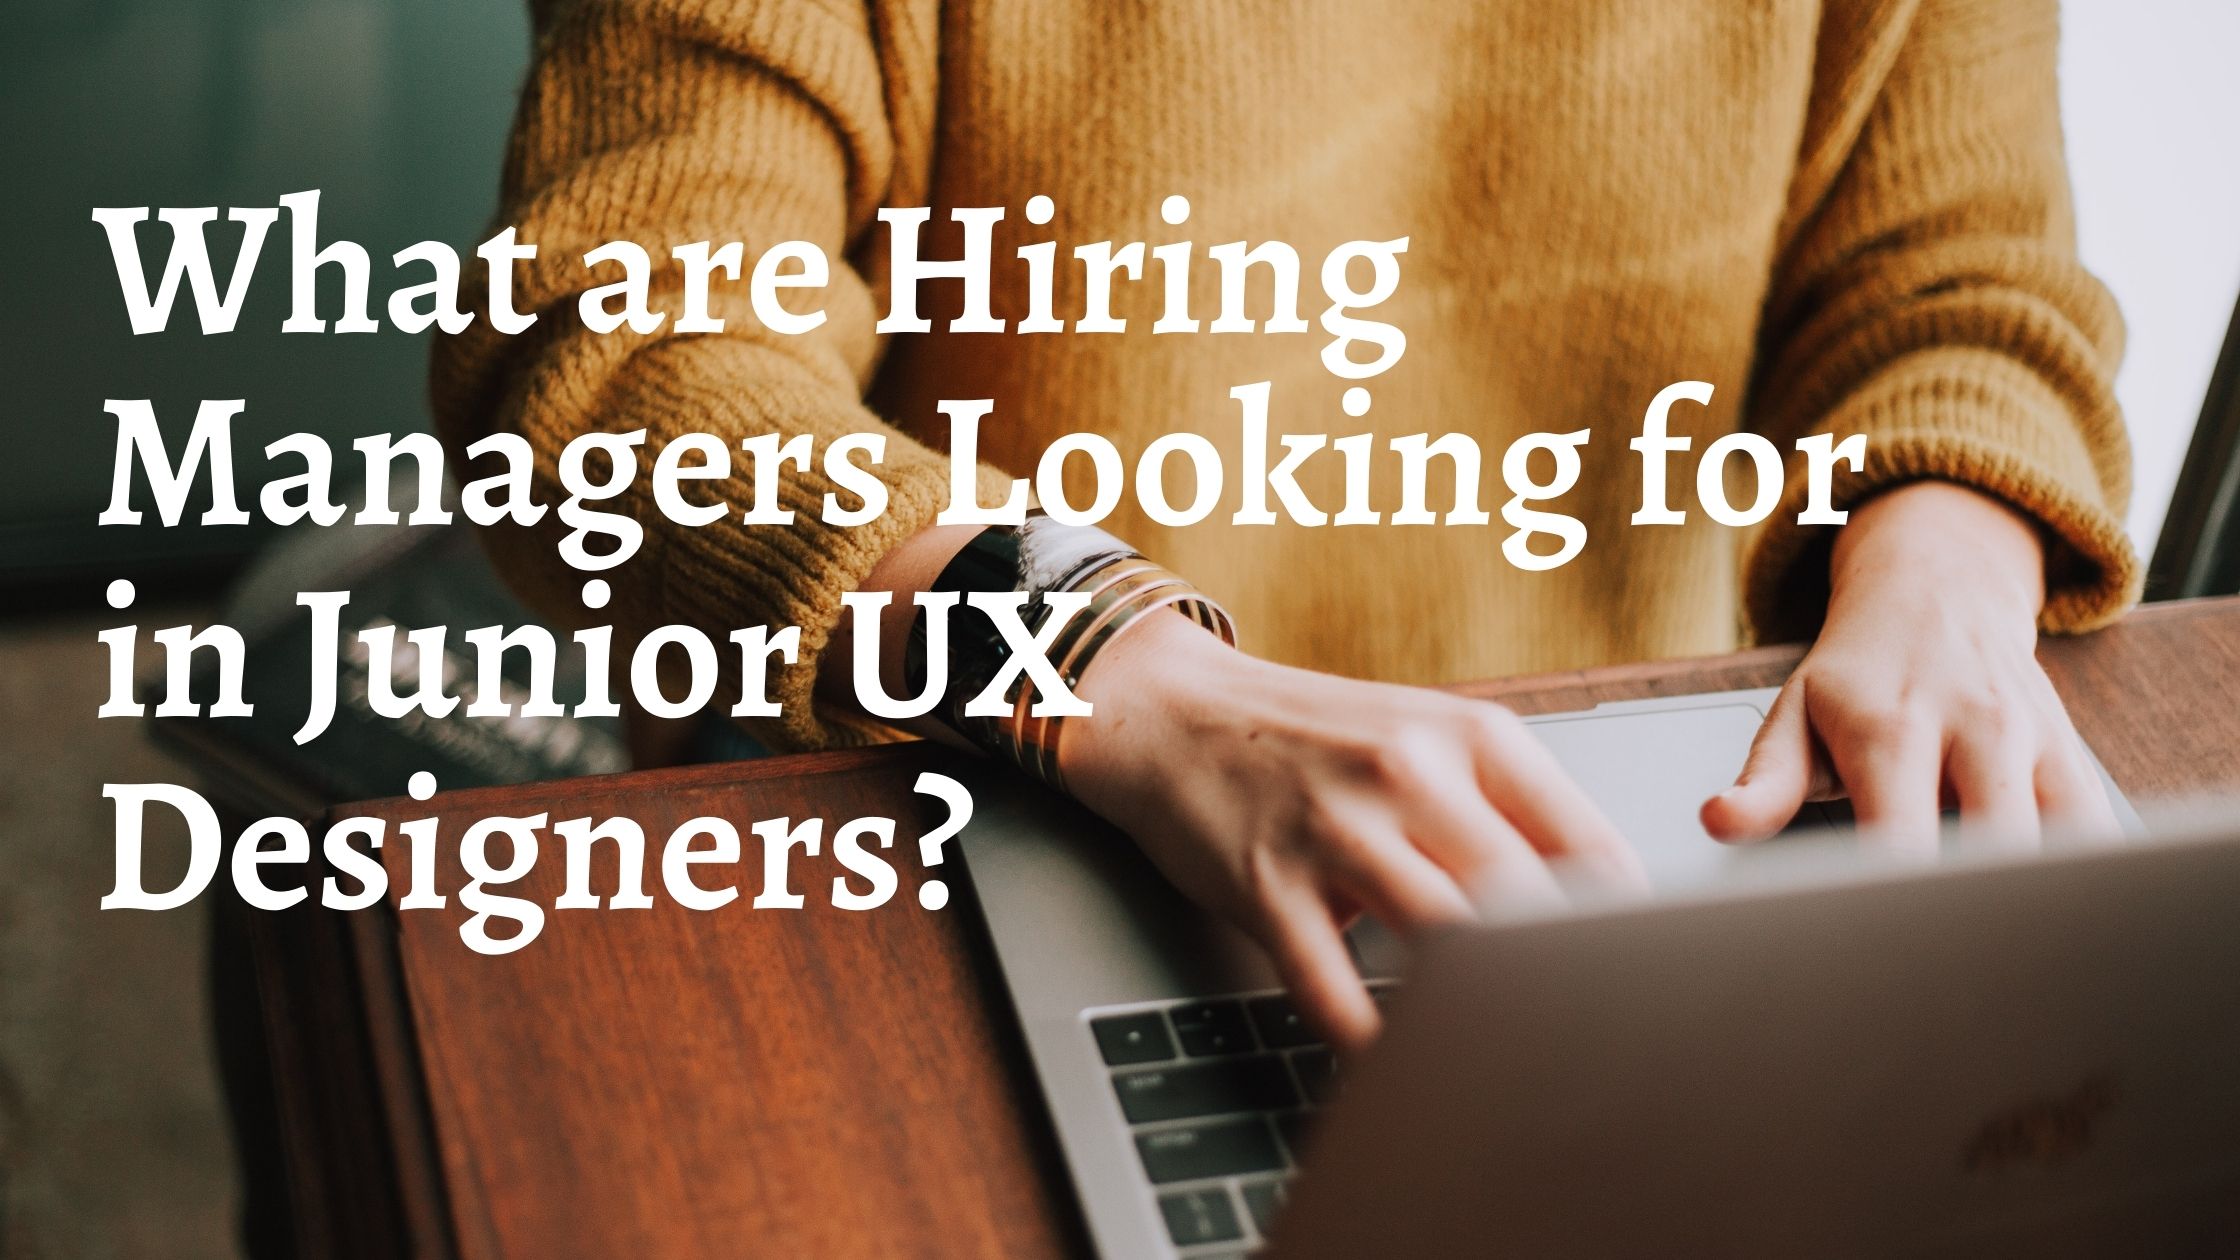 public/uploads/2022/01/What-are-Hiring-Managers-Looking-for-in-Junior-UX-Designers.jpg